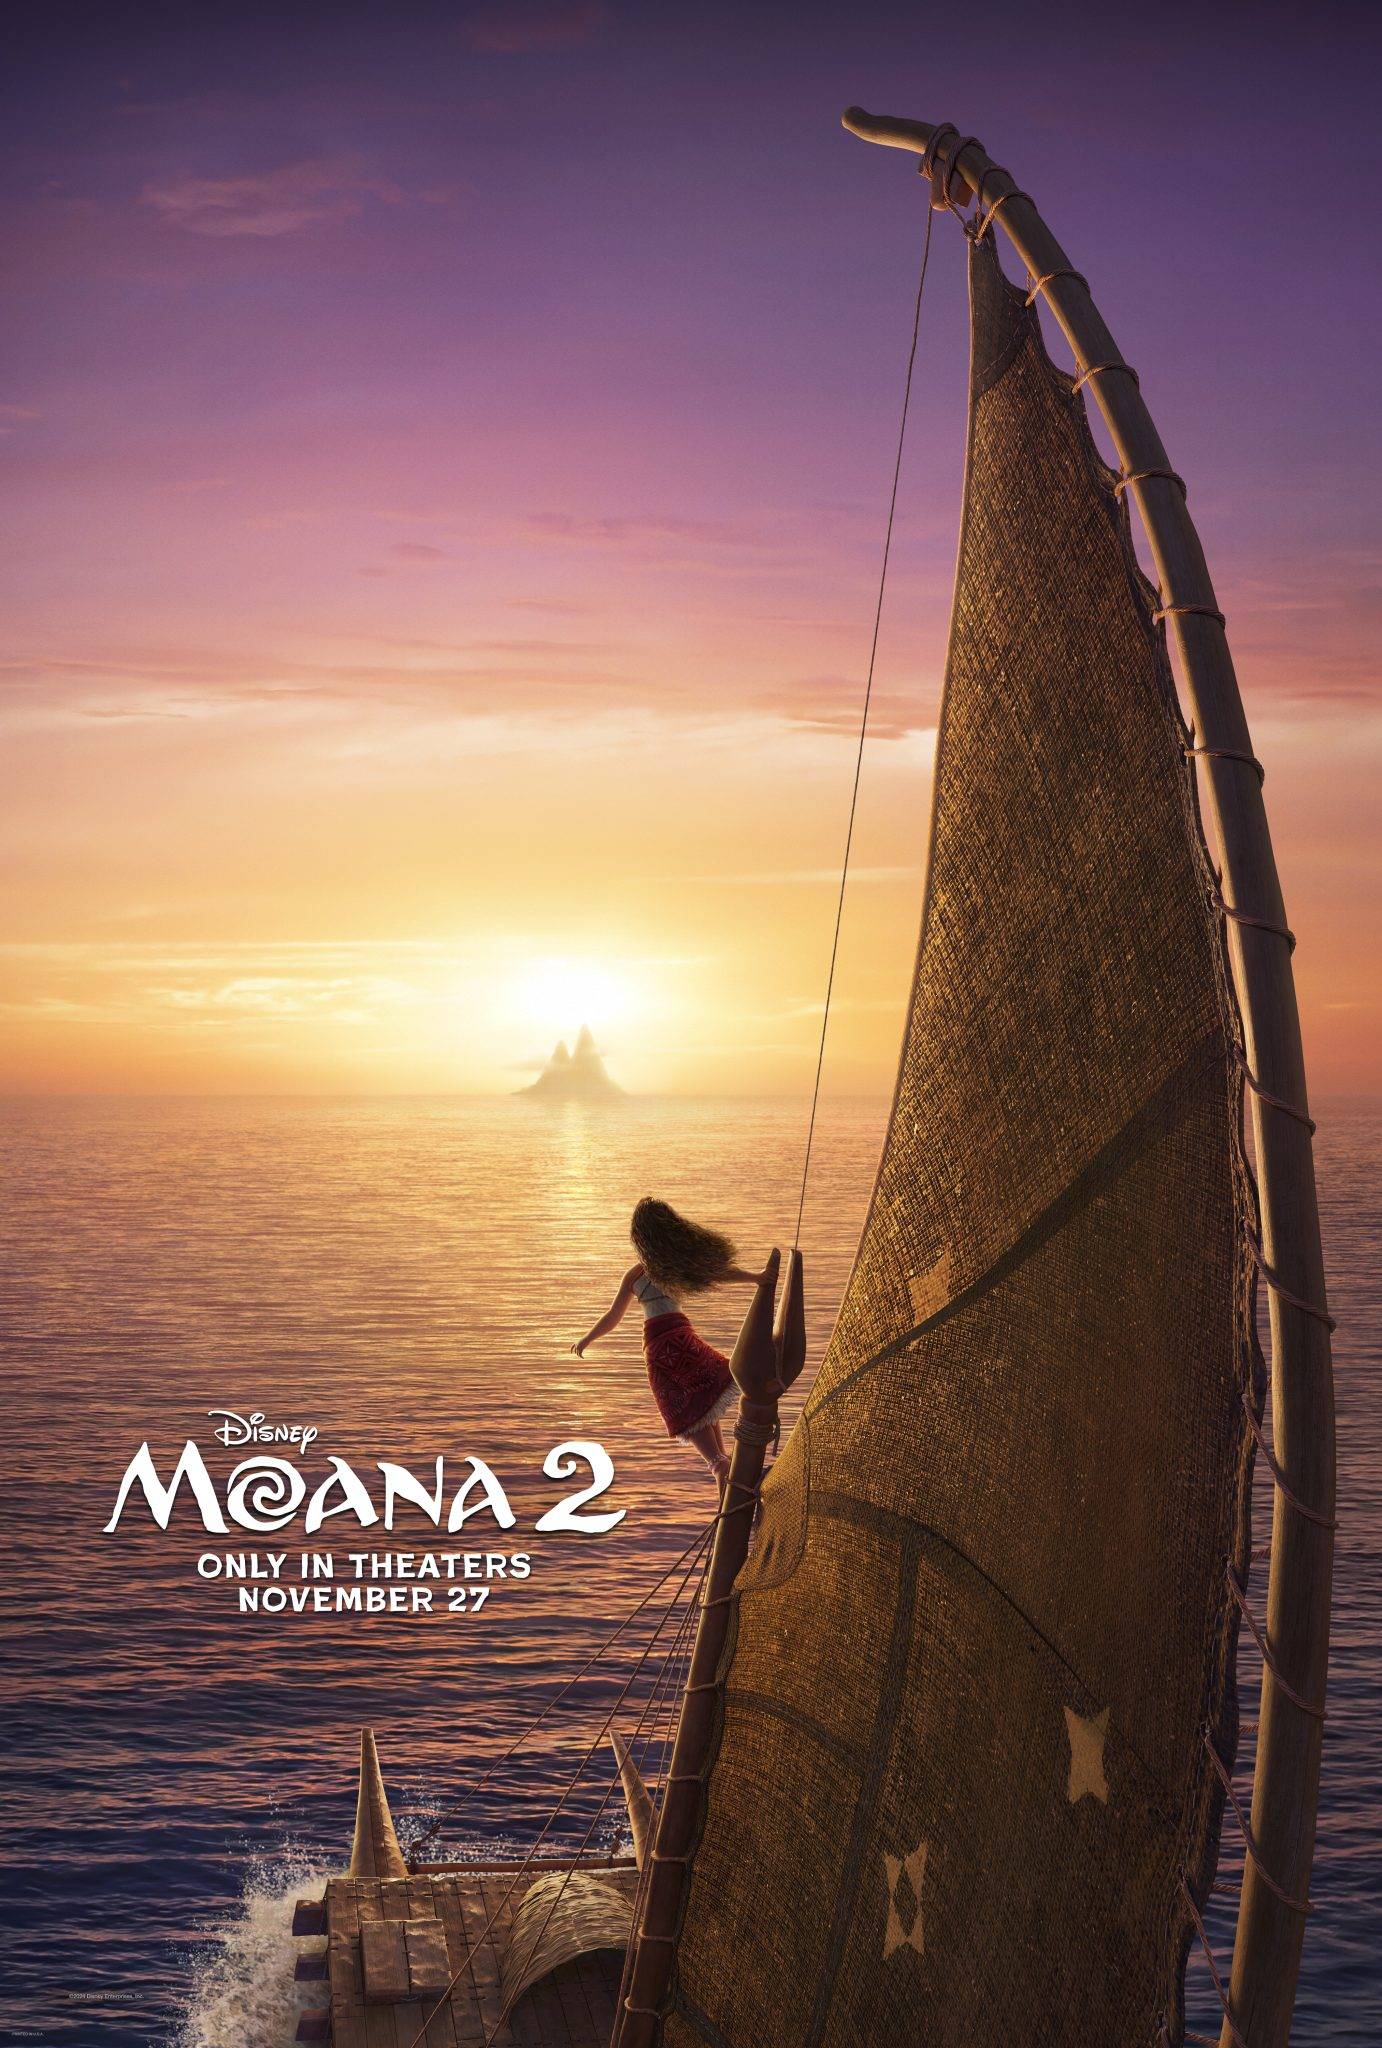 Watch the New Teaser Trailer for Disney's Moana 2